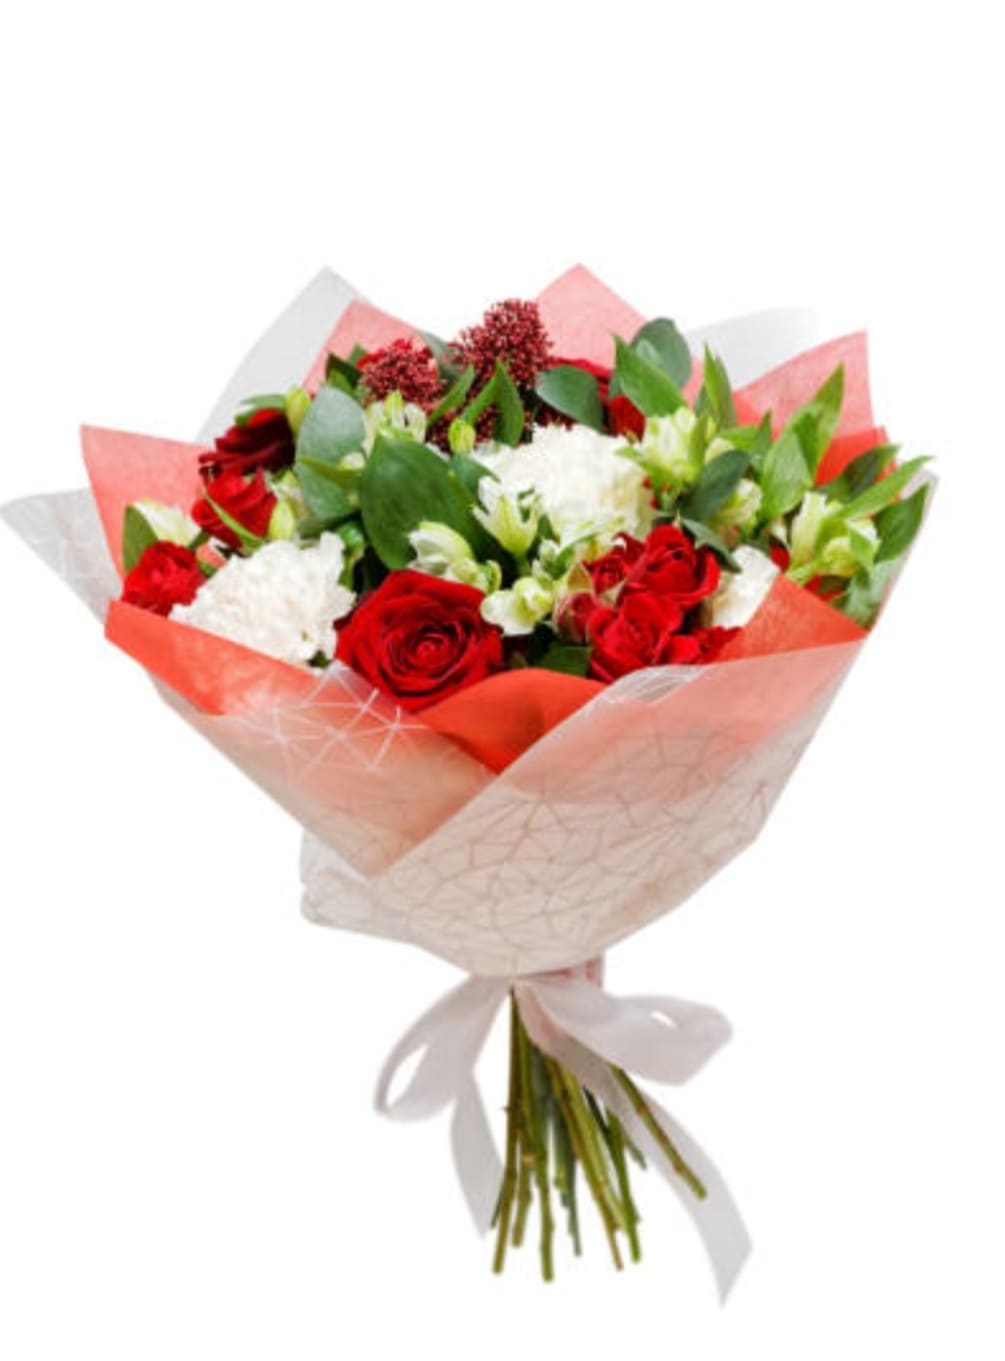 Assorted mix flowers for that special friend or loved one just to